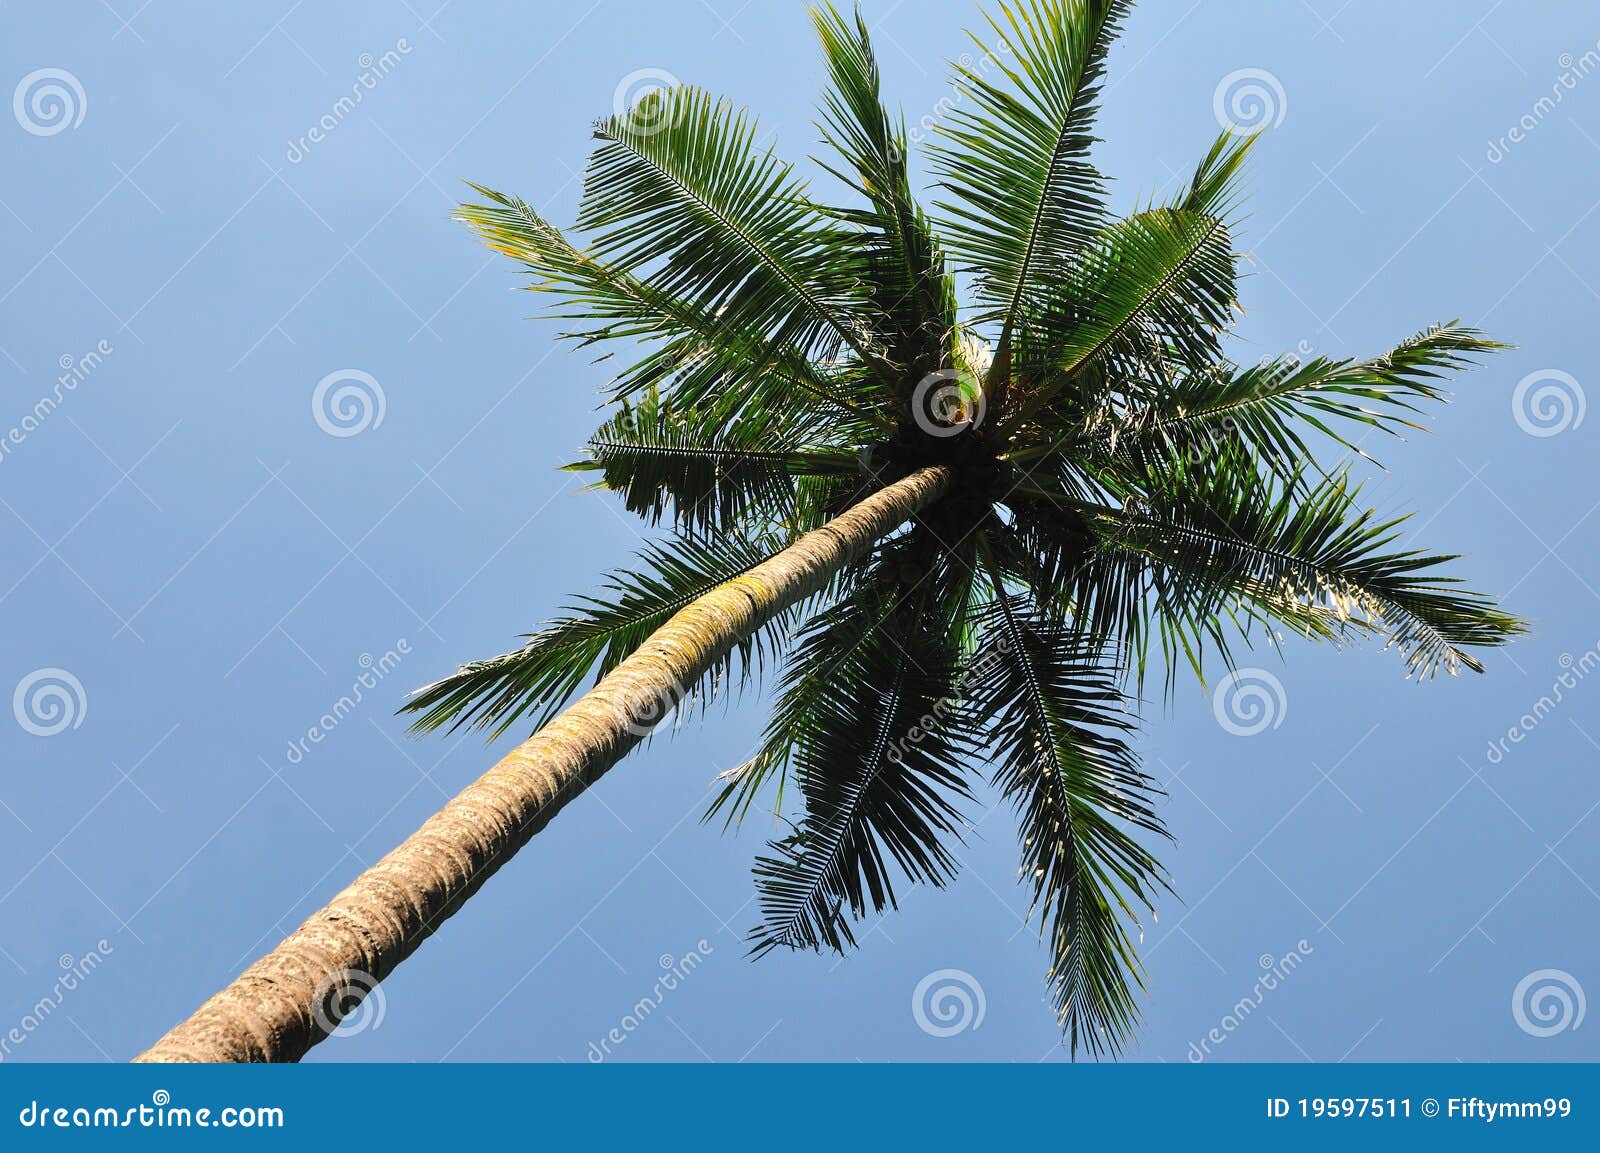 Single tall coconut tree from tropical island singapore.